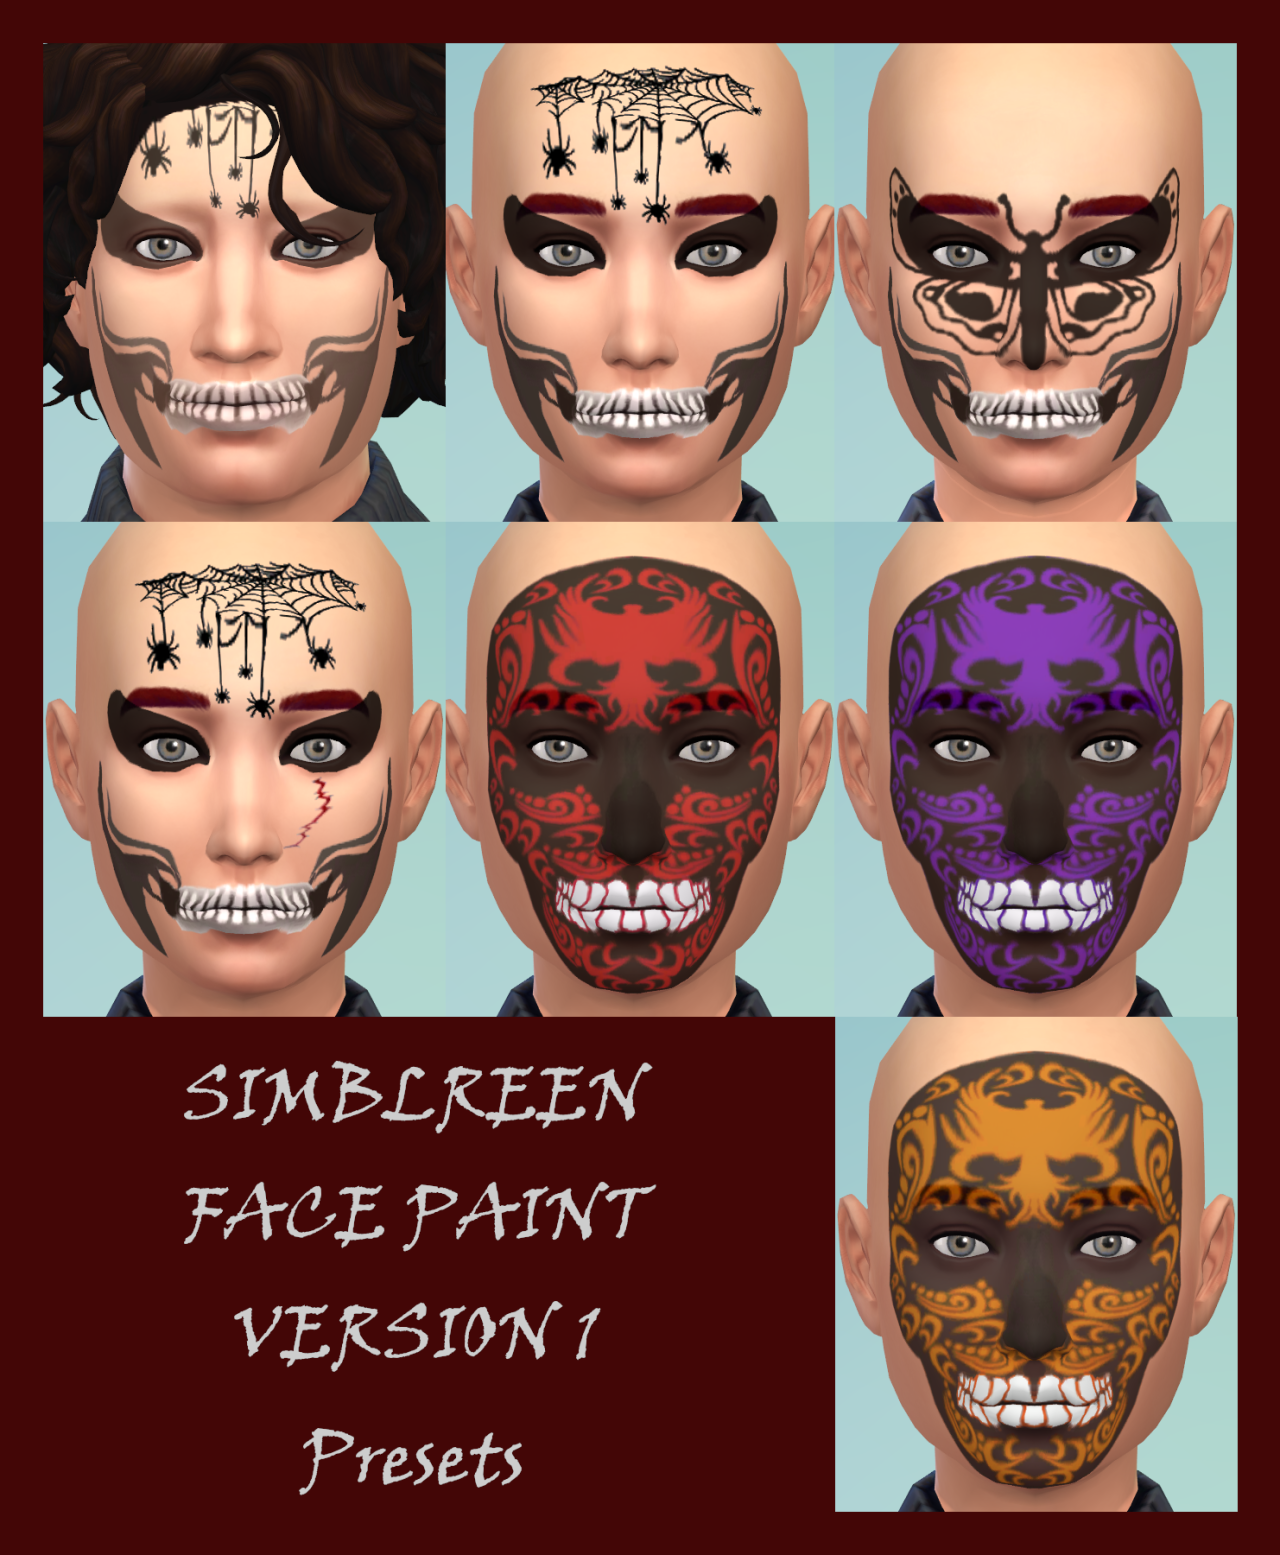 The Sims Creations — Reposting last year's face paint 🎃🧛‍♂️👻🕸️